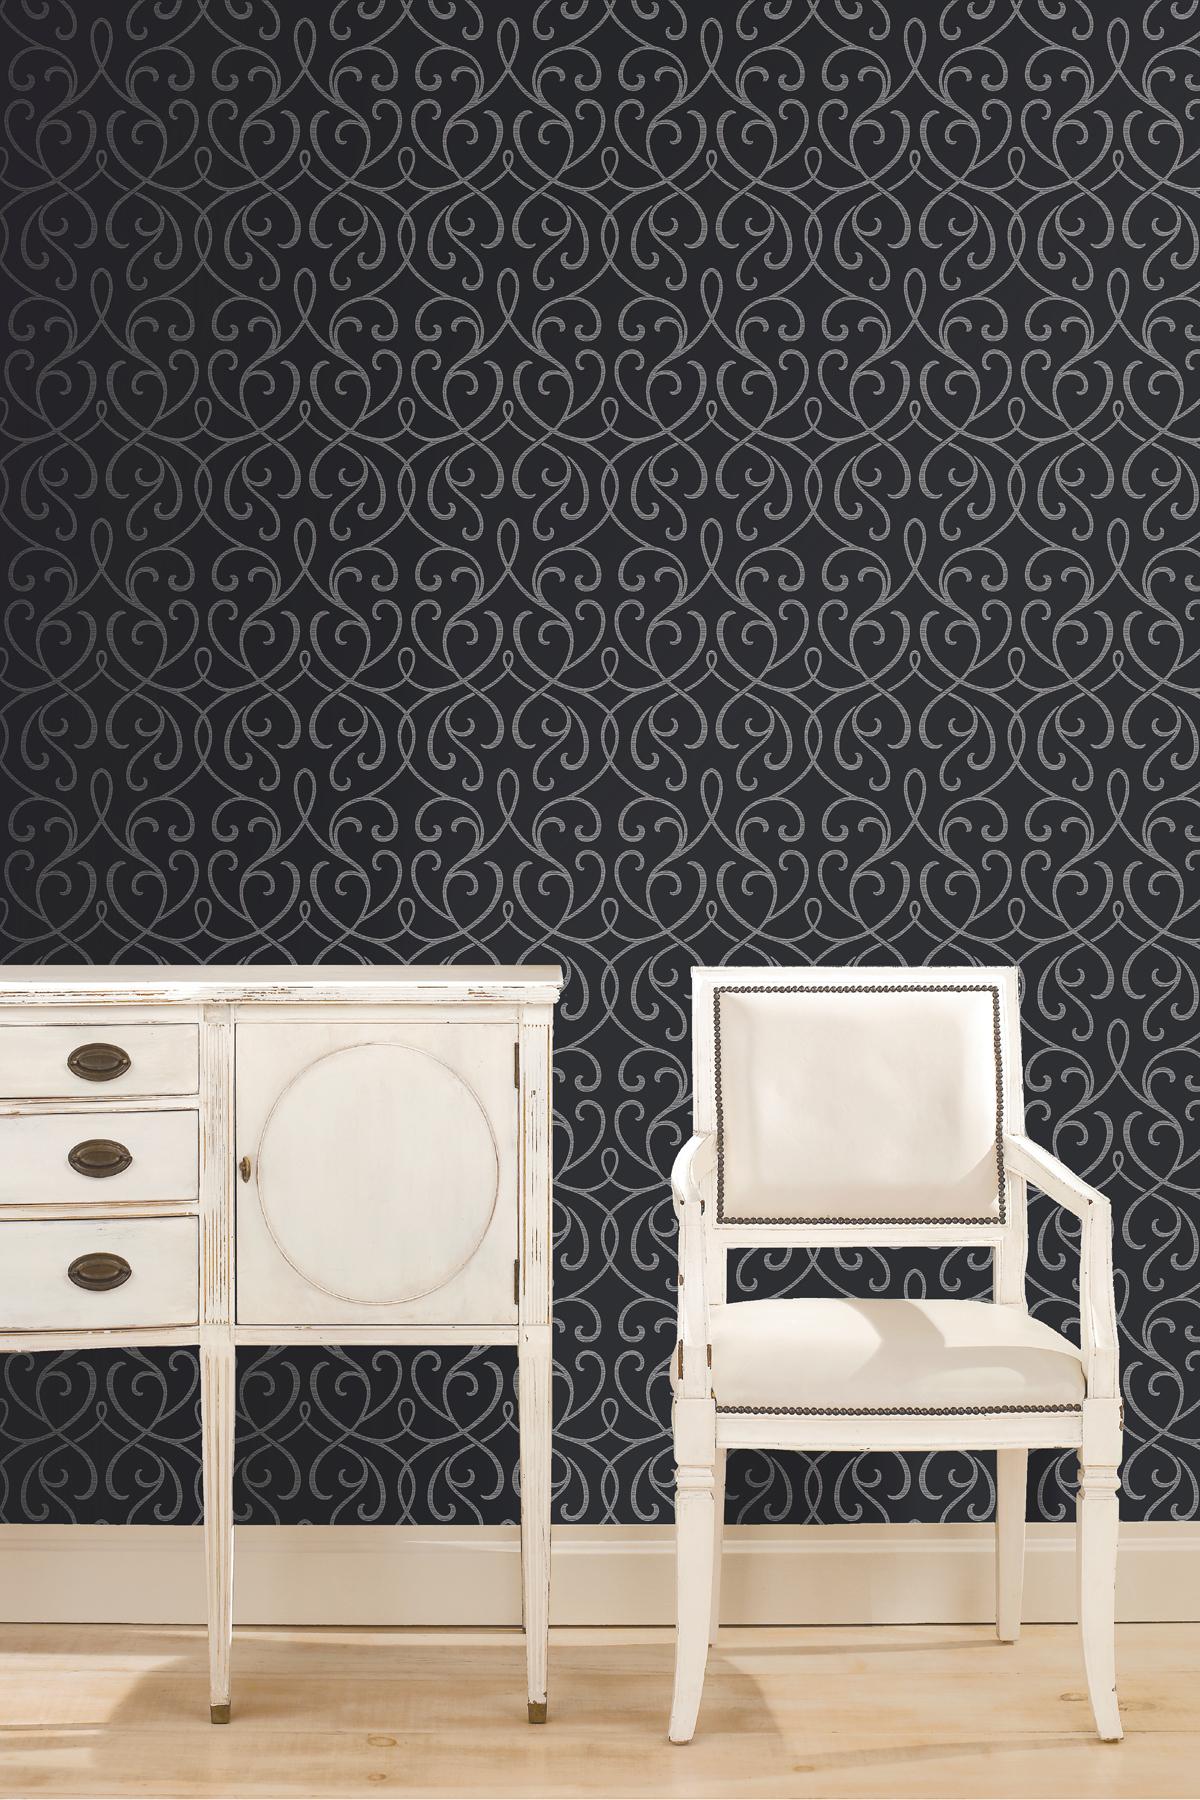 Brewster Wallcovering Alouette Charcoal Mod Swirl Charcoal Wallpaper